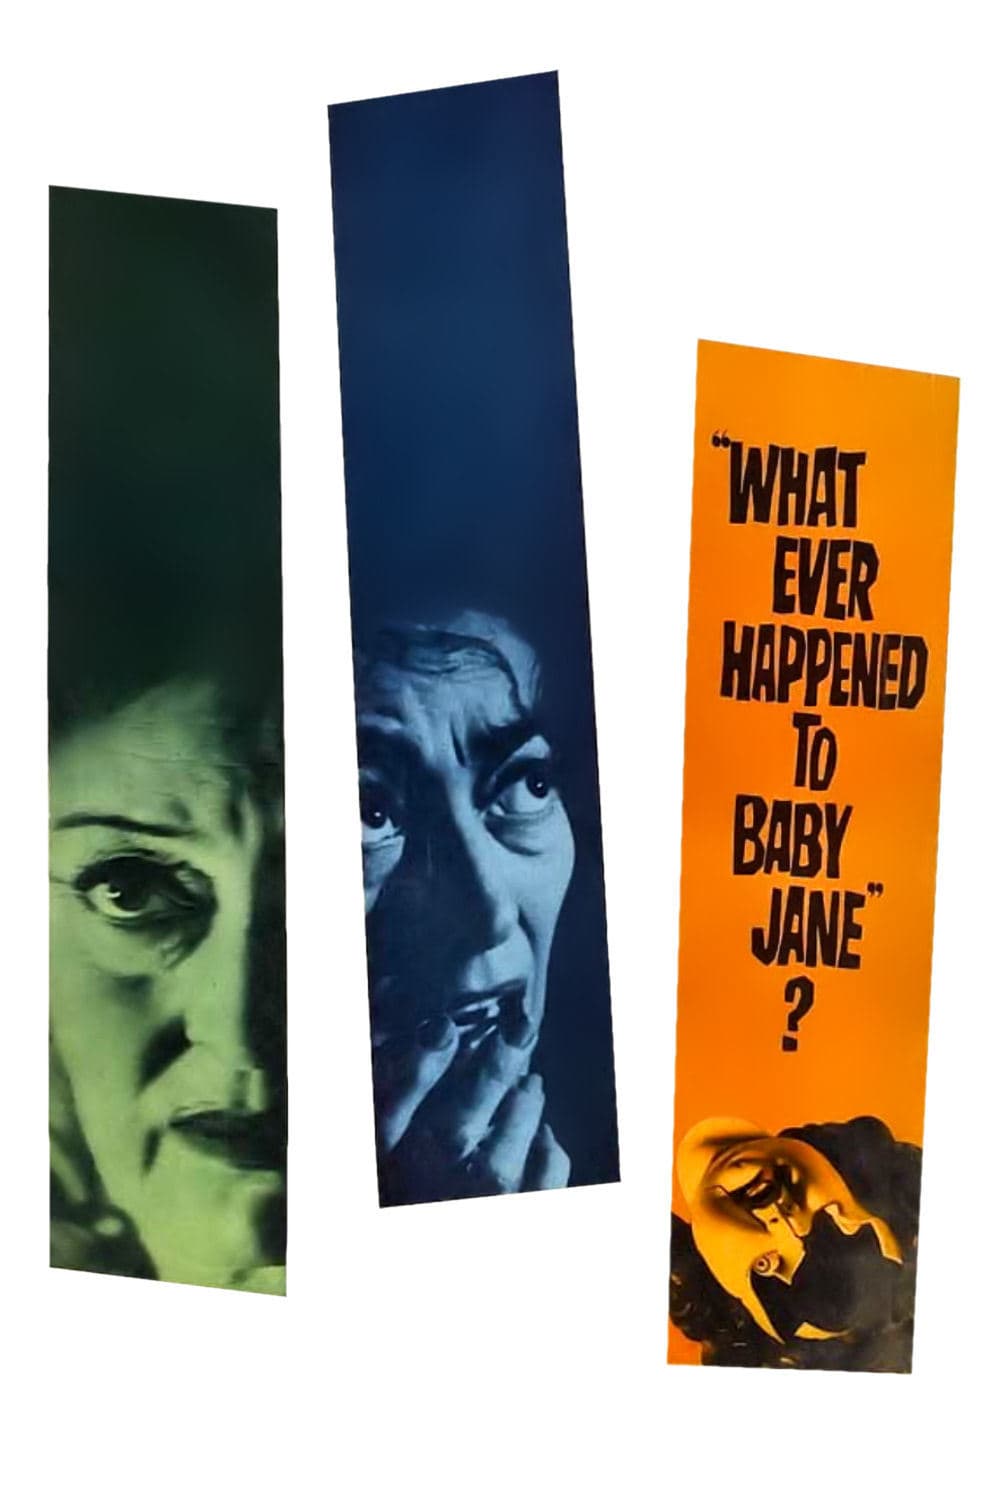 Poster for the movie "What Ever Happened to Baby Jane?"